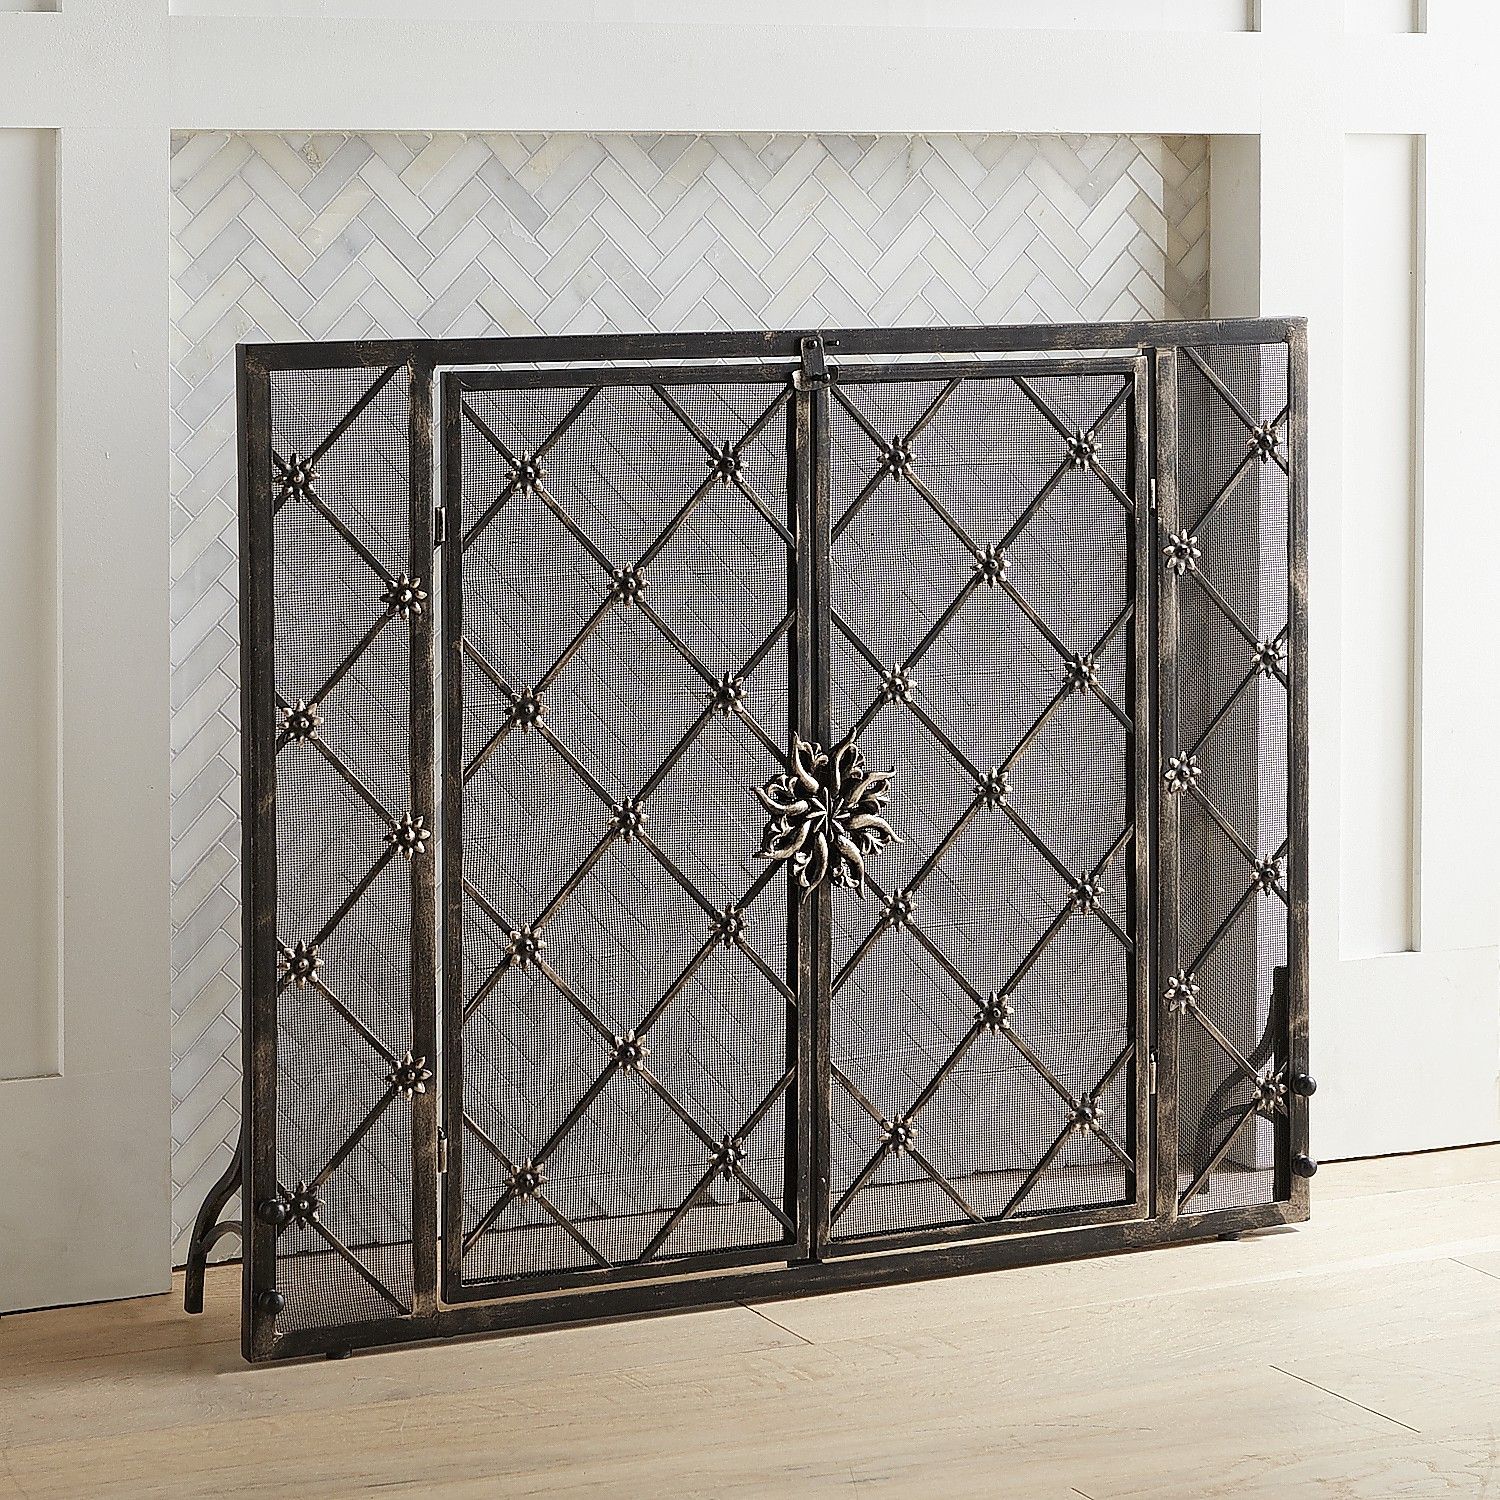 Cheap Fireplace Screens Best Of Junction Fireplace Screen In 2019 Products